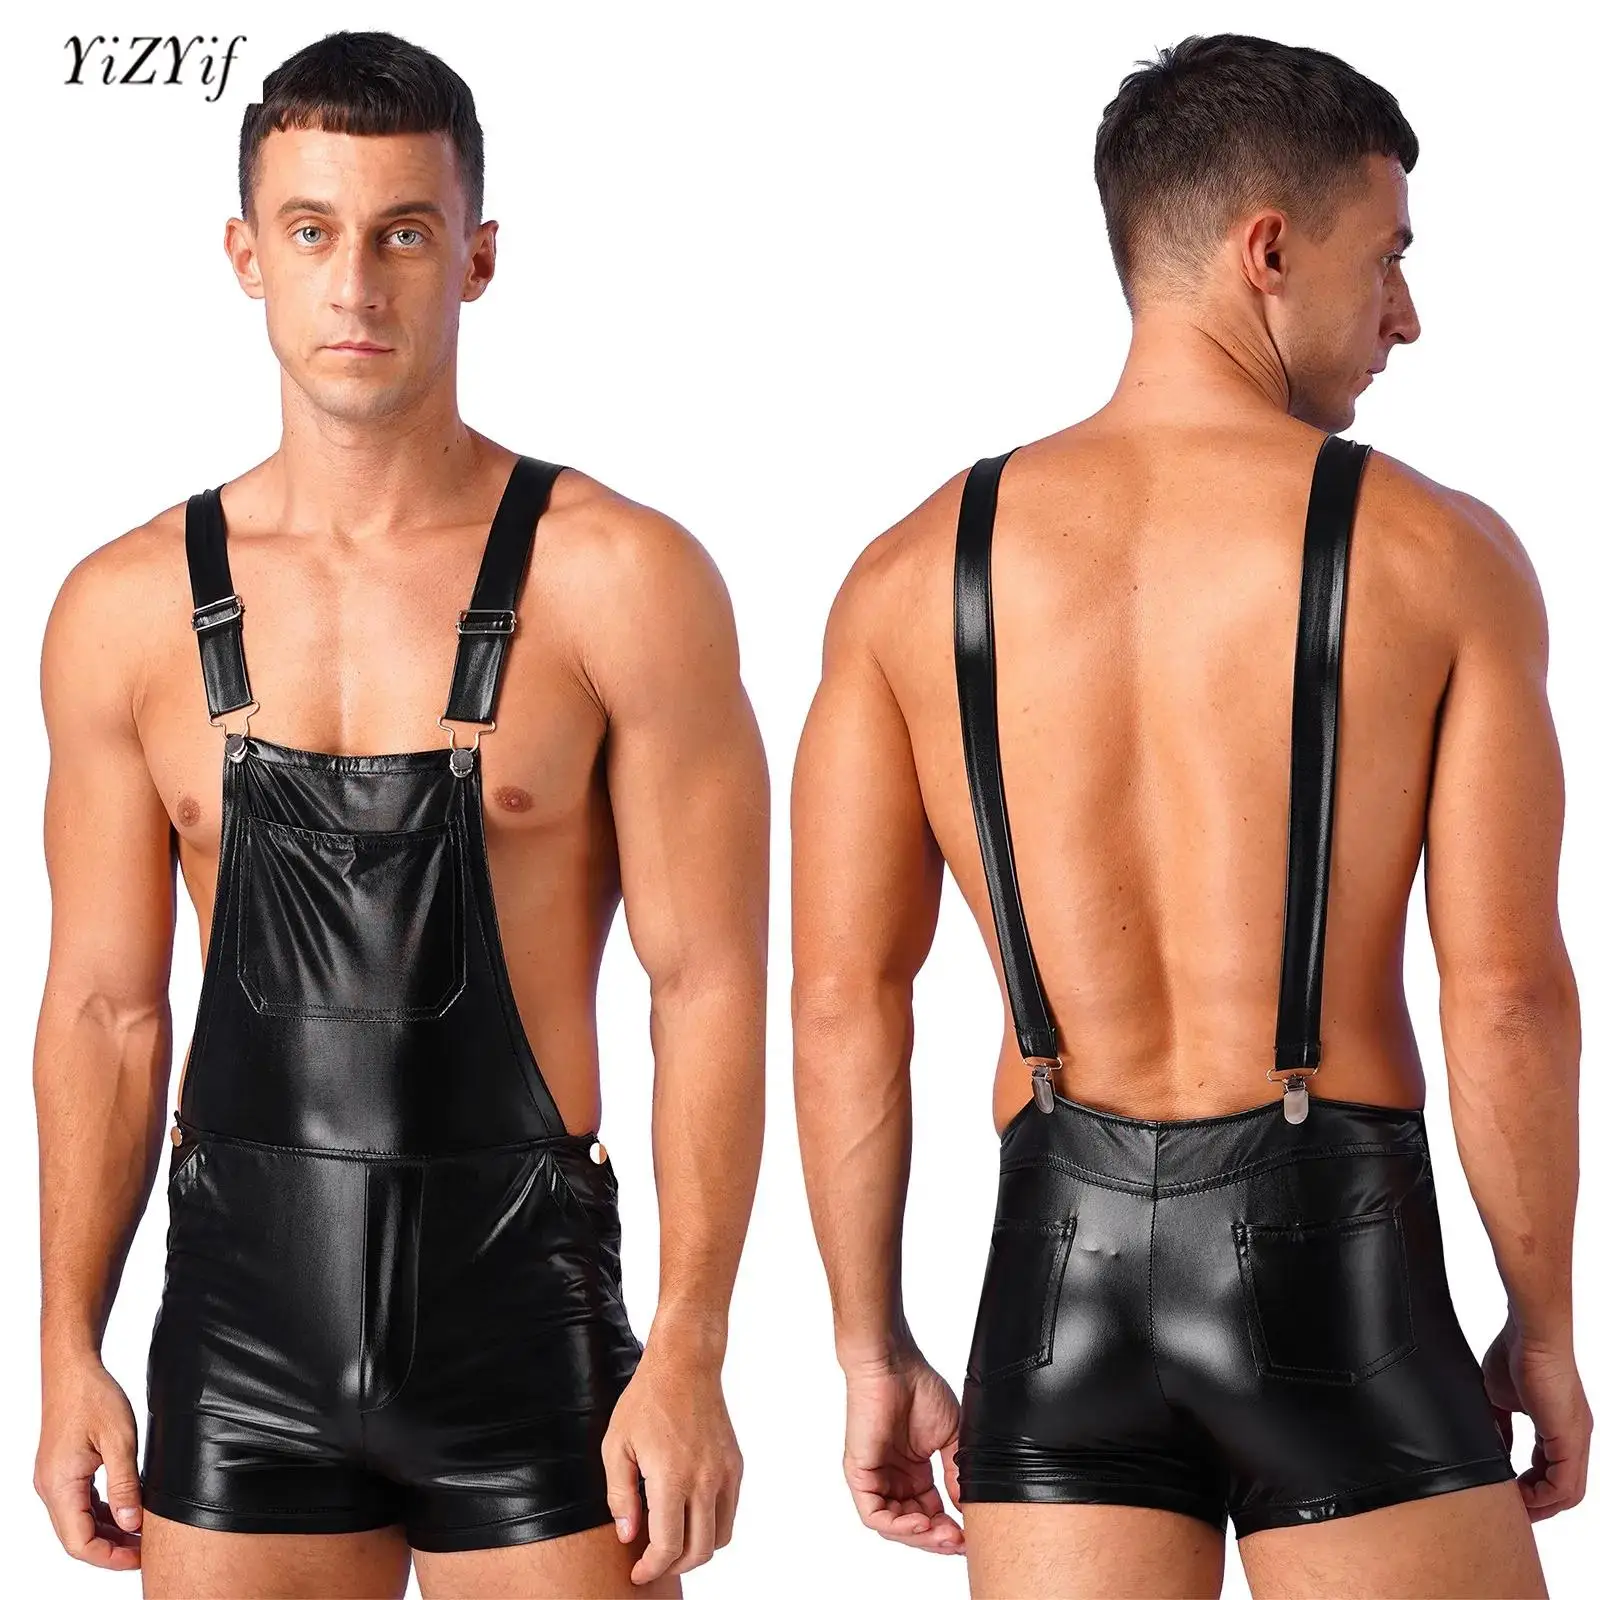 

Mens Shiny Metallic Bib Overall Suspender Shorts Jazz Hip Hop Dance Dress Fashion Holographic Solid Color Rave Party Clubwear